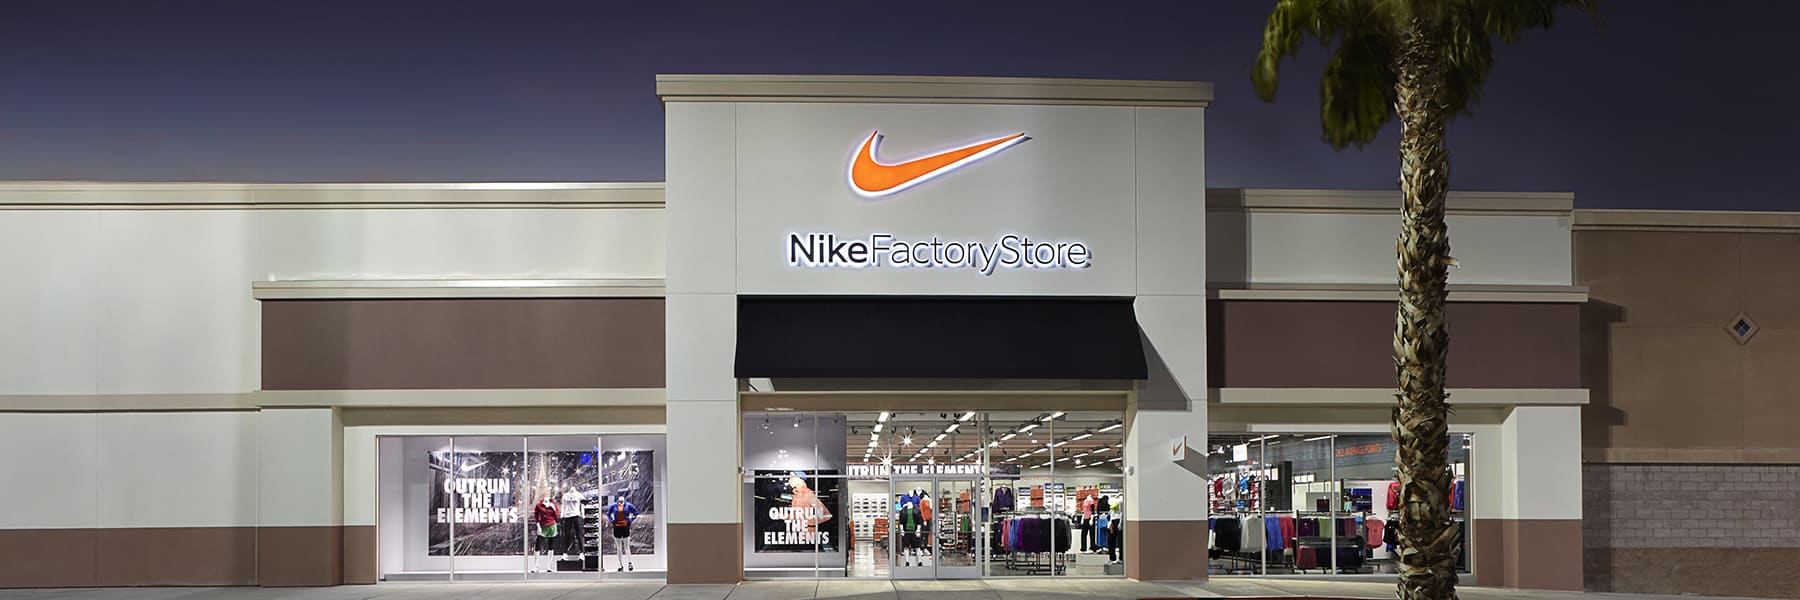 closest nike store to my location